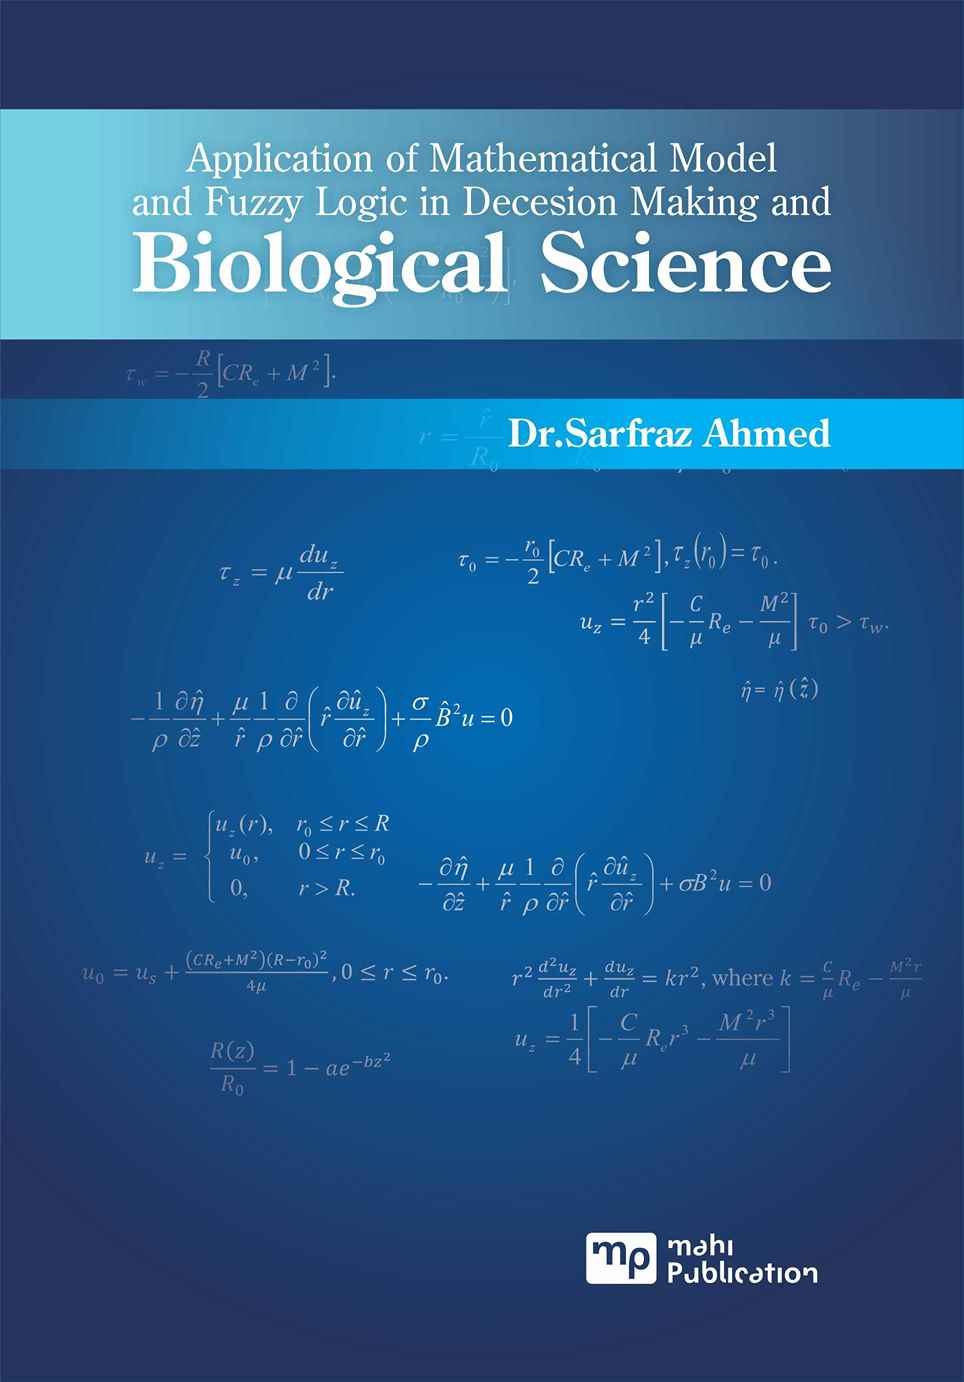 Application of Mathematical Model and Fuzzy Logic in Decesion Making and Biological Science